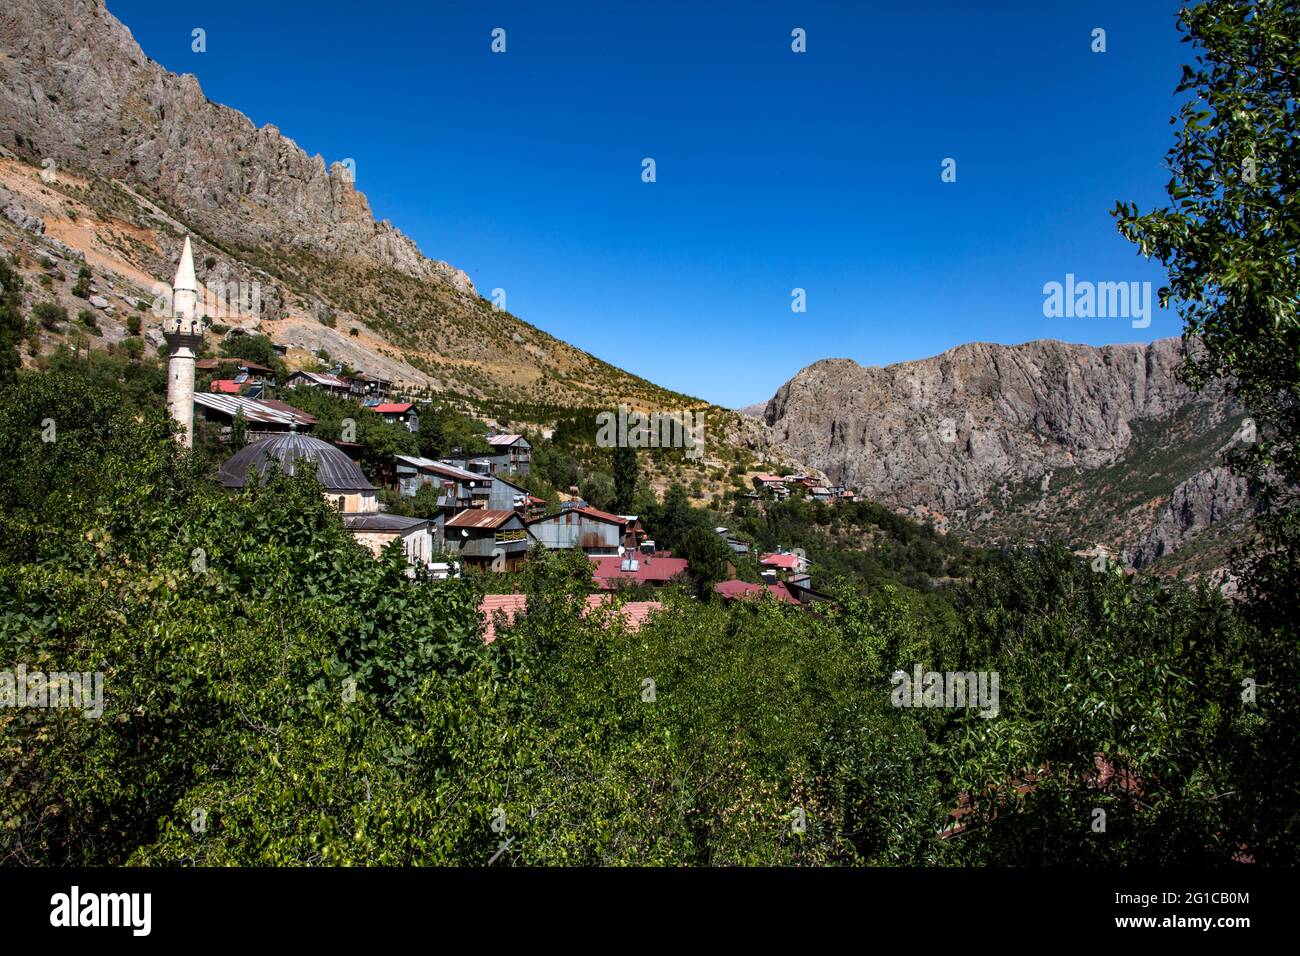 This scenery of Erzincan reflects the amazing natural elements of this place. Buildings and a mosque in the forest surrounded by mountains under the b Stock Photo